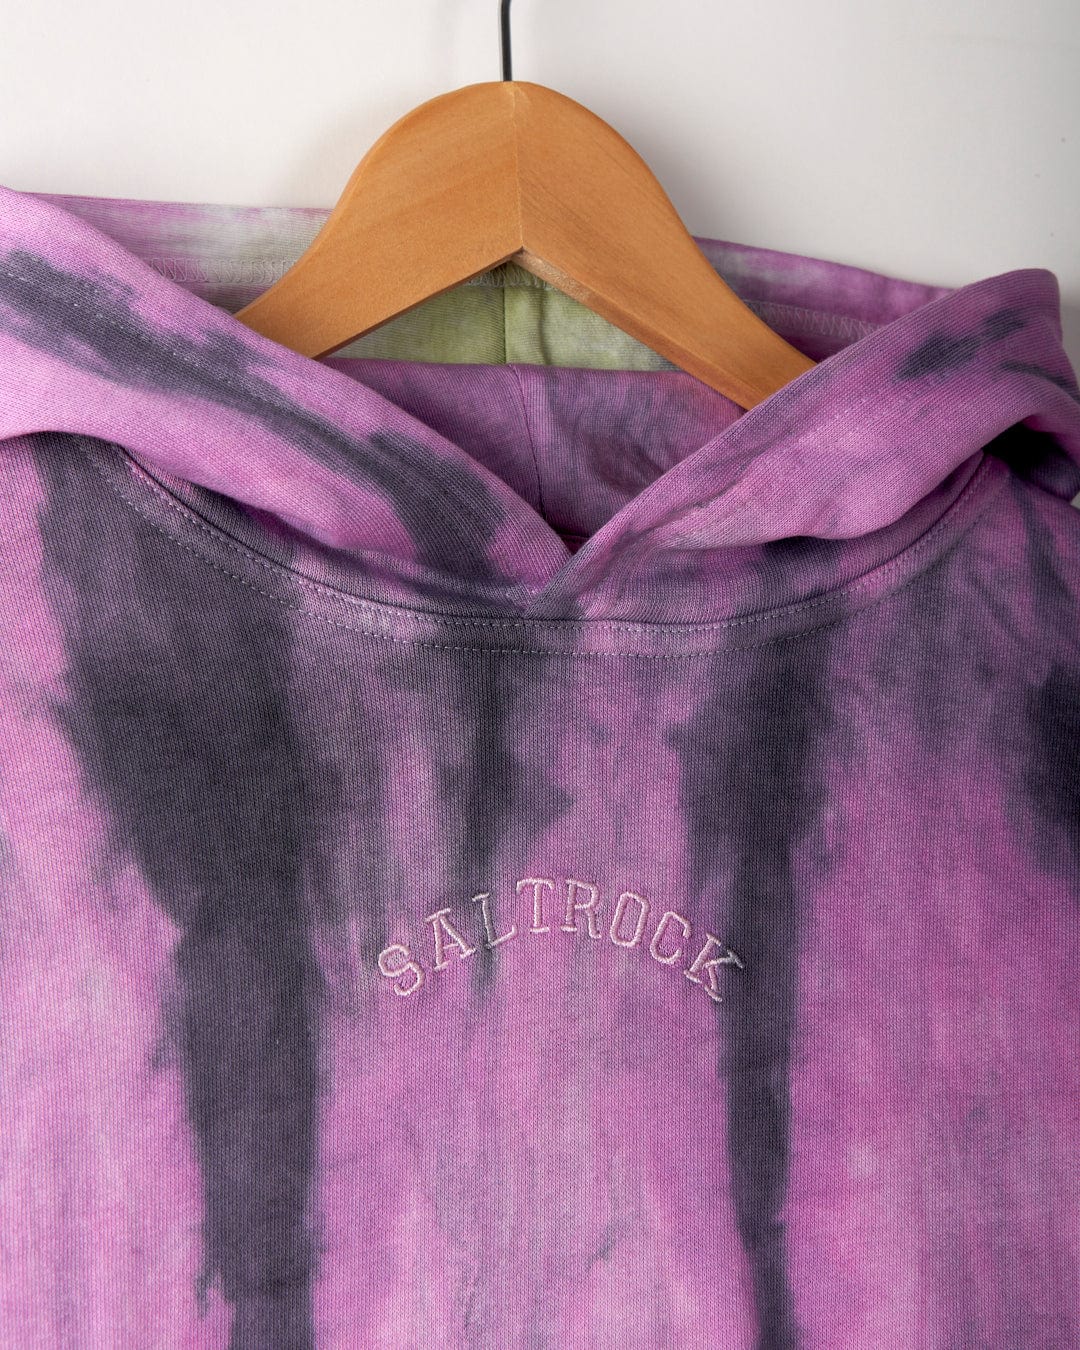 Close-up of a purple and black tie-dye hoodie on a wooden hanger, featuring the Saltrock branding with embroidered text "SALTROCK" on the back. Made from 100% cotton, this Rock Valley - Pop Hoodie - Multi showcases a vibrant tie dye print that stands out.